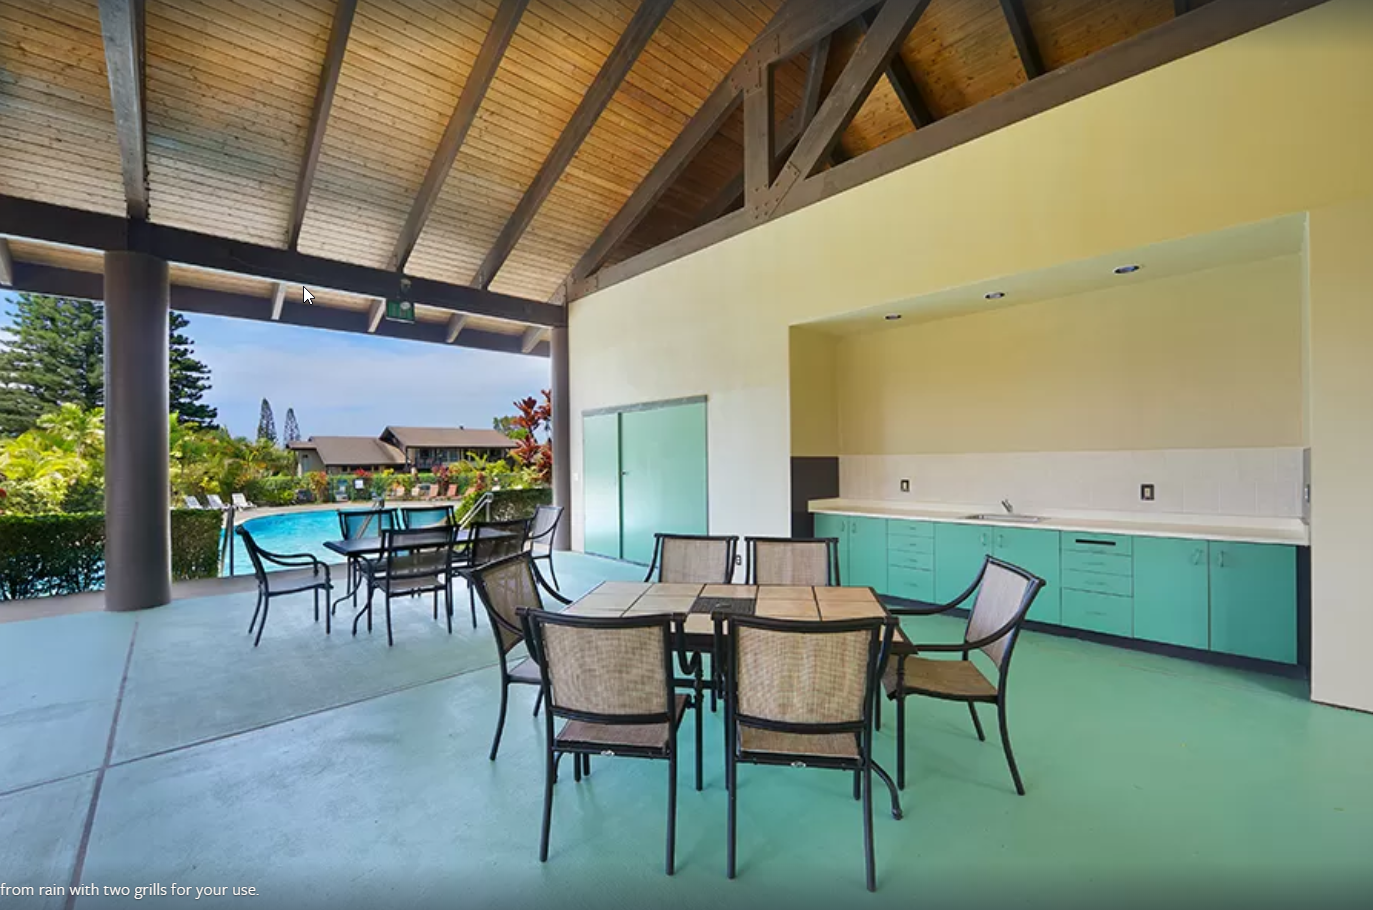 Princeville Vacation Rentals, Mauna Kai 11 - Covered dining space in pool area, with two grills for guest use